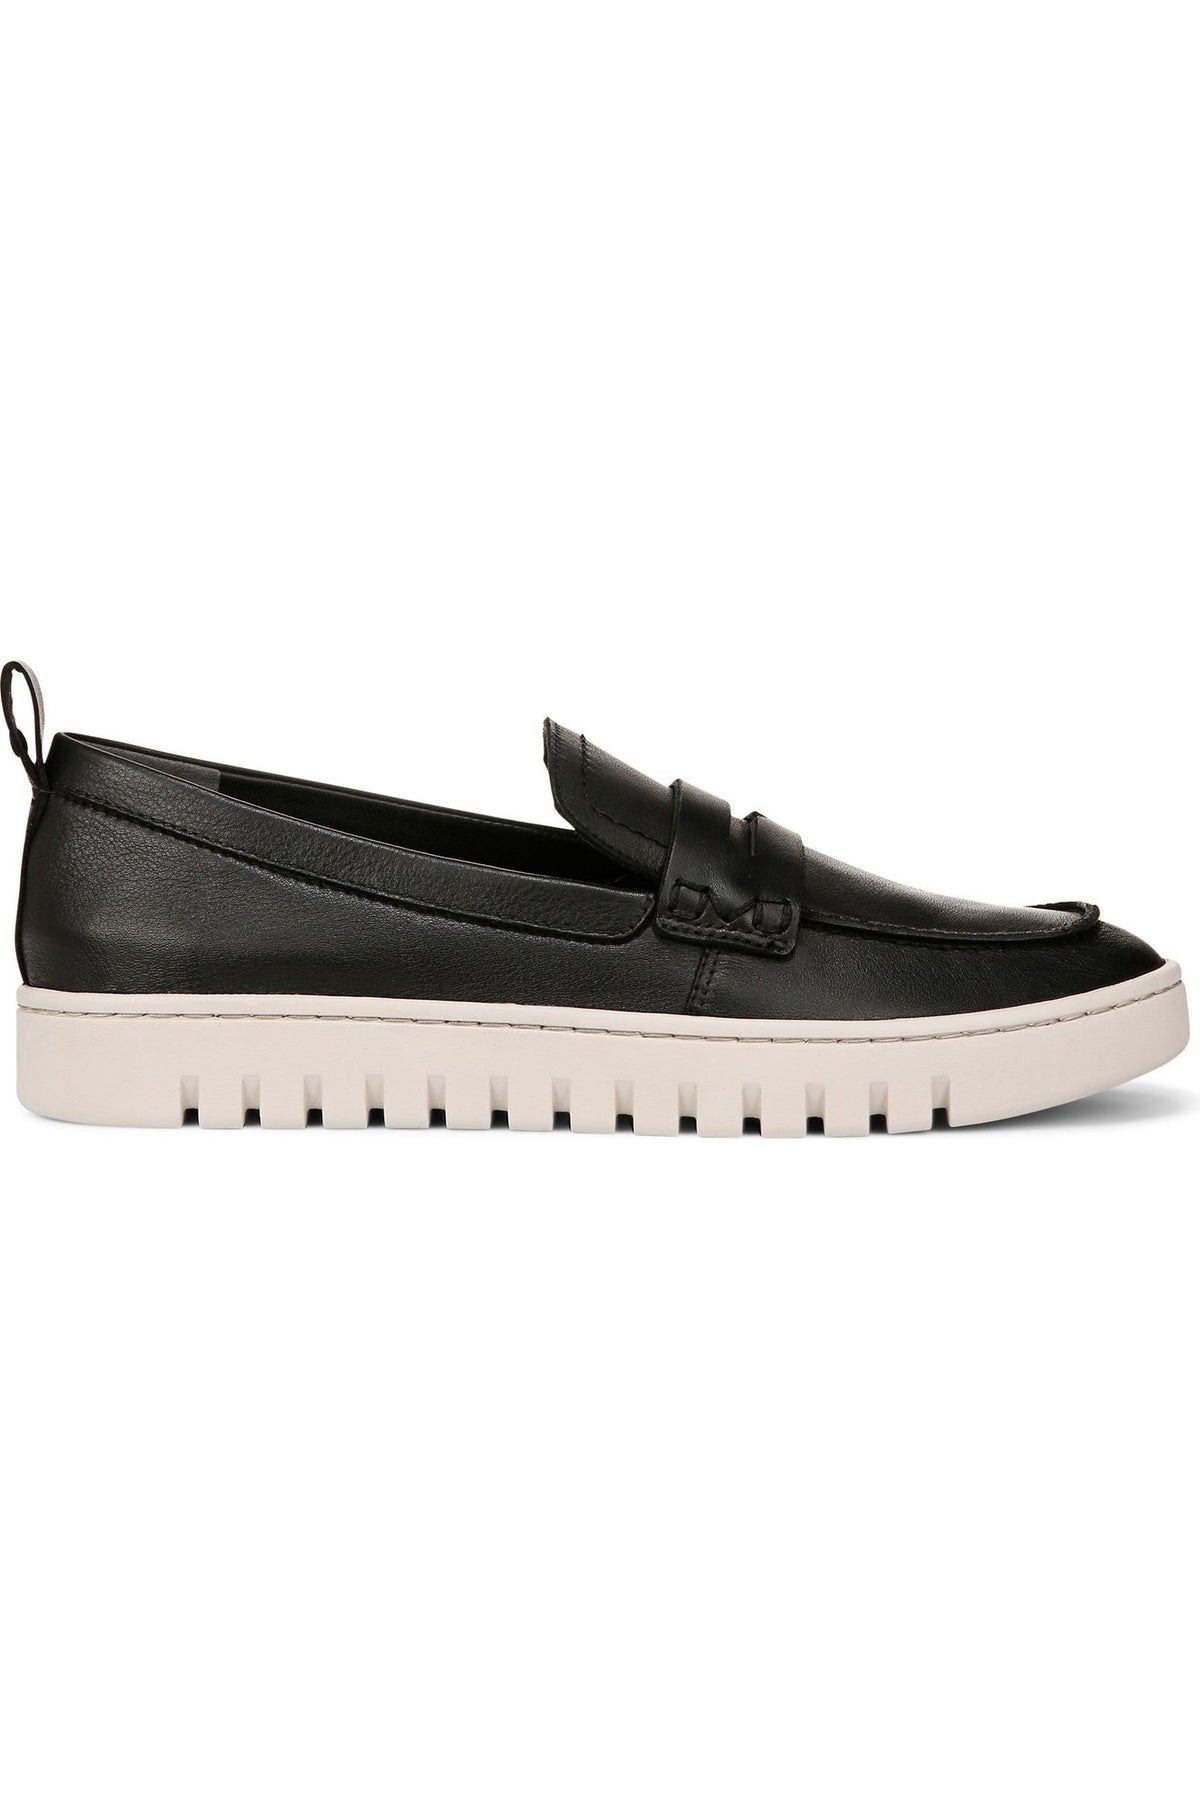 Vionic Leather Loafer - Style UPTOWN, side2